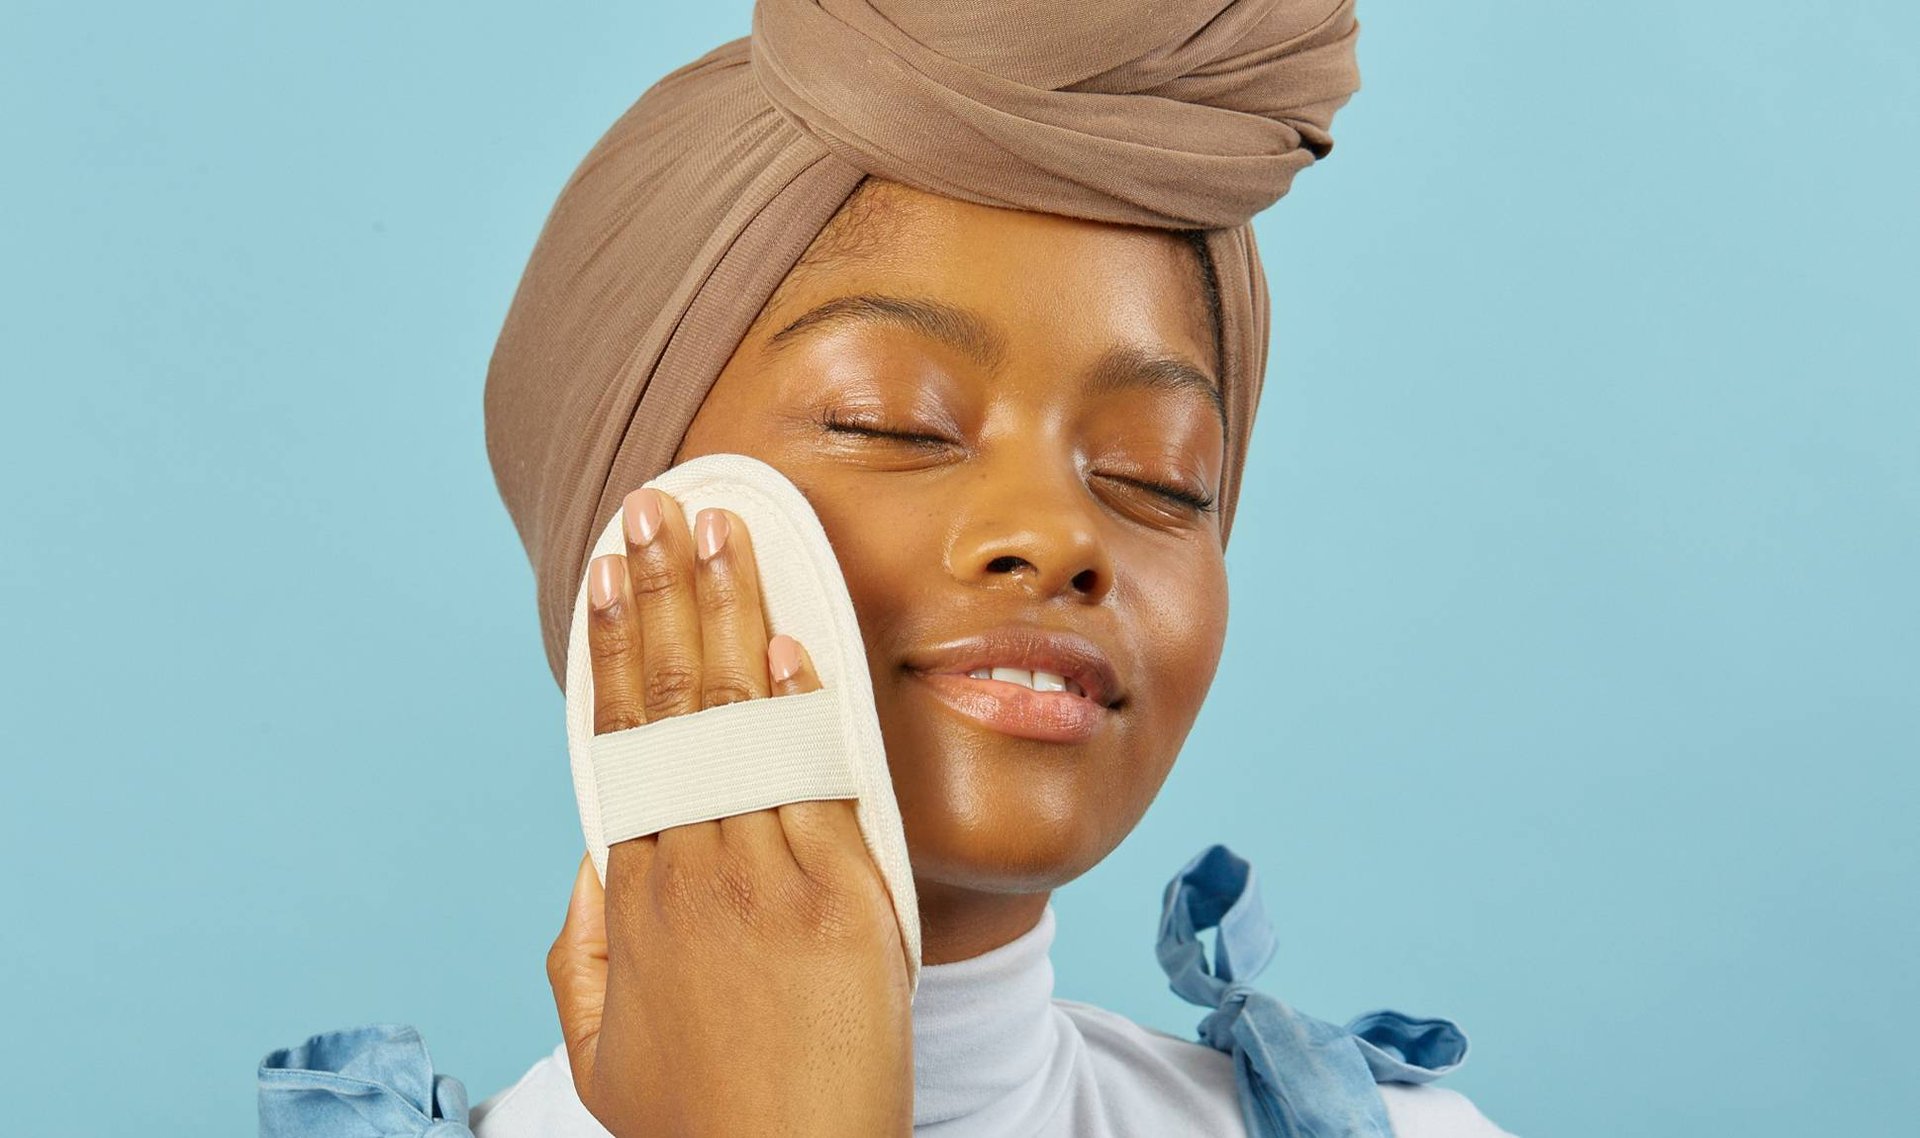 Do I Need to Exfoliate My Skin? A Derm Weighs In